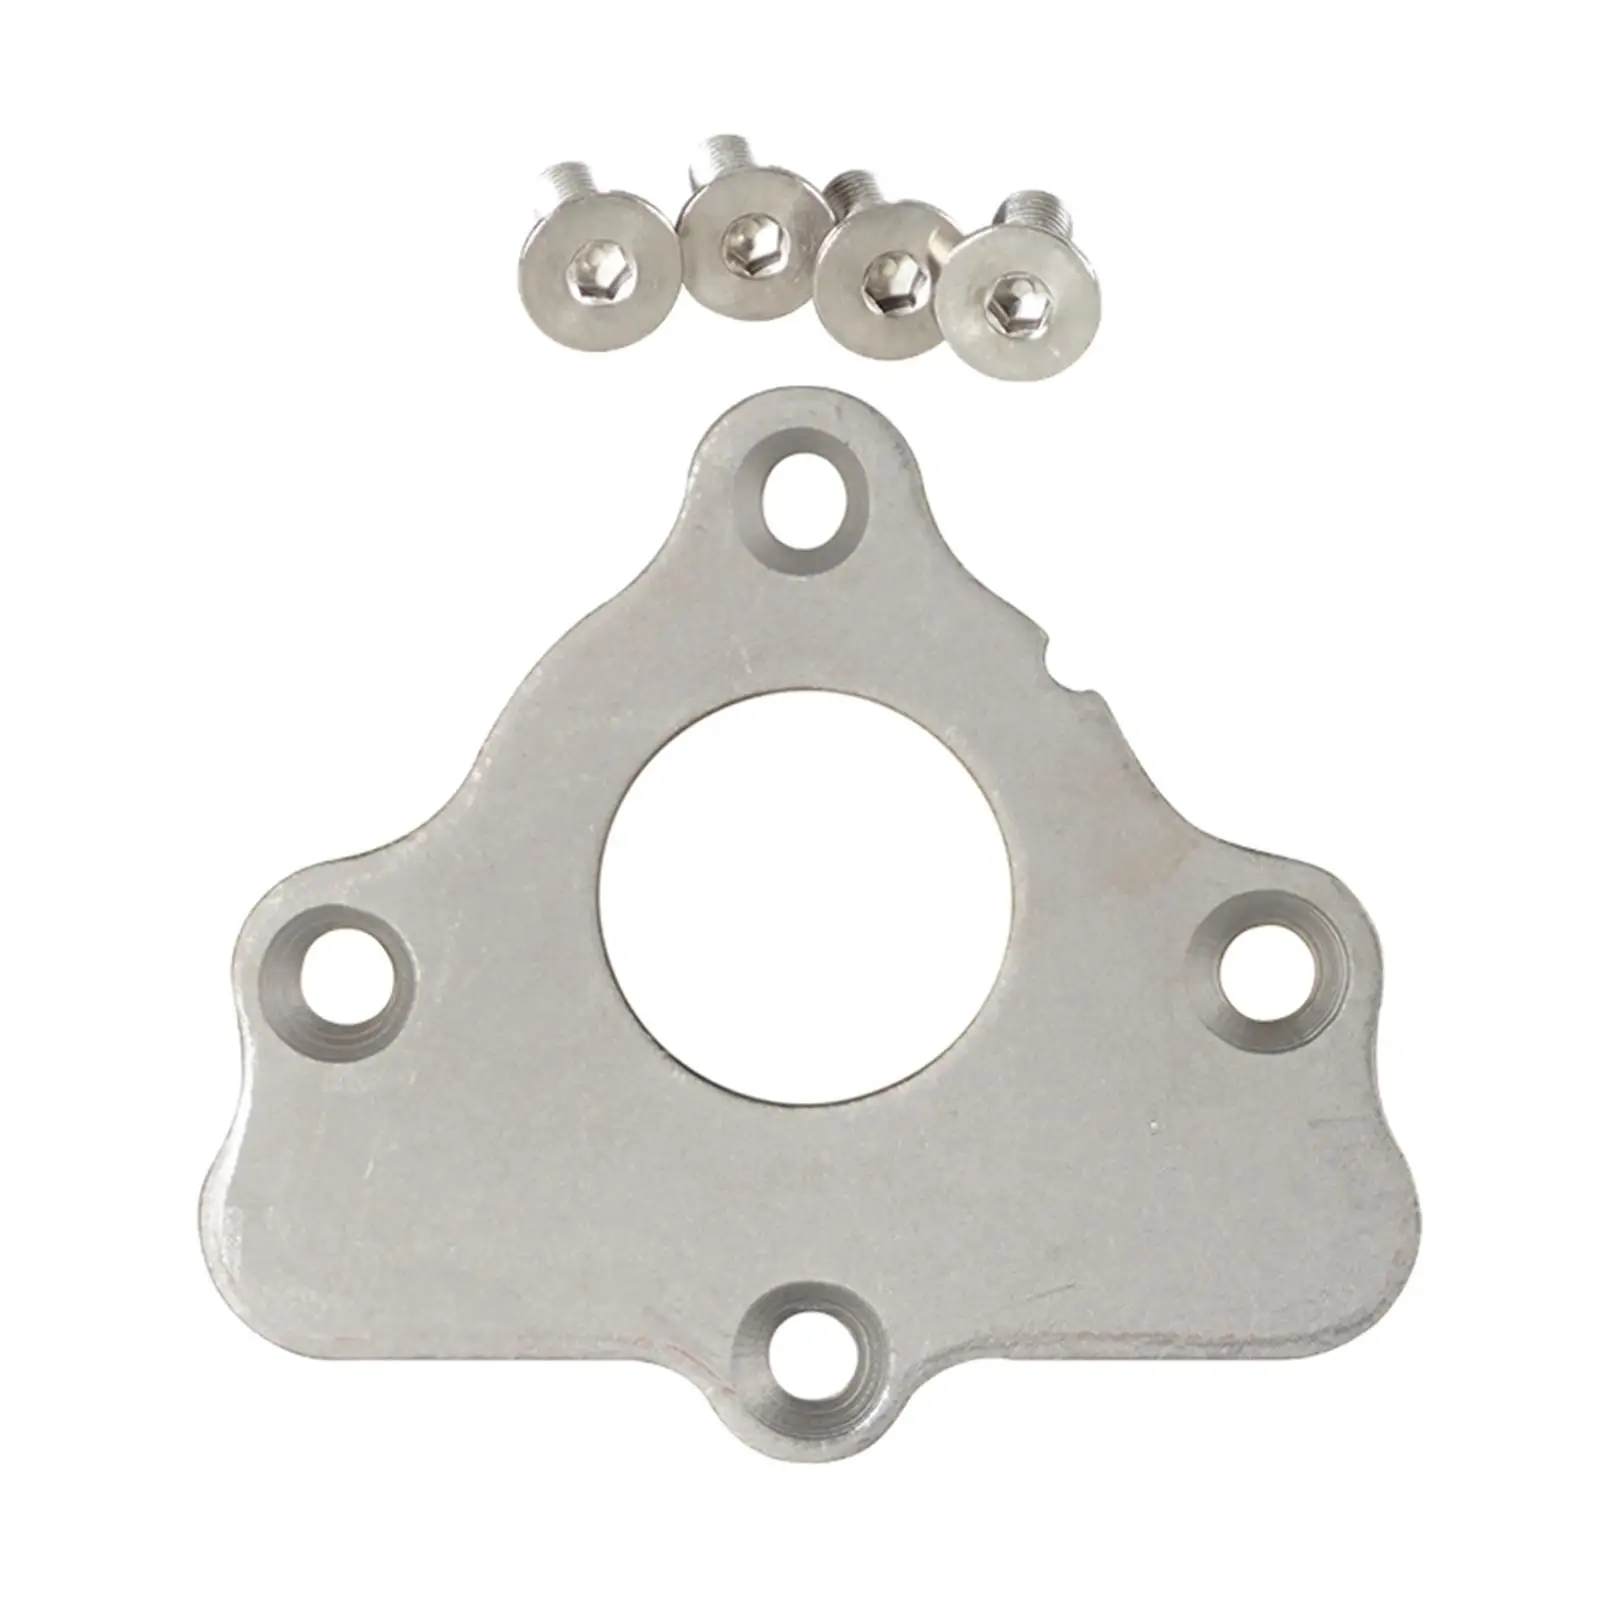 Camshaft Thrust Retainer for LS Series Engines Direct Replaces